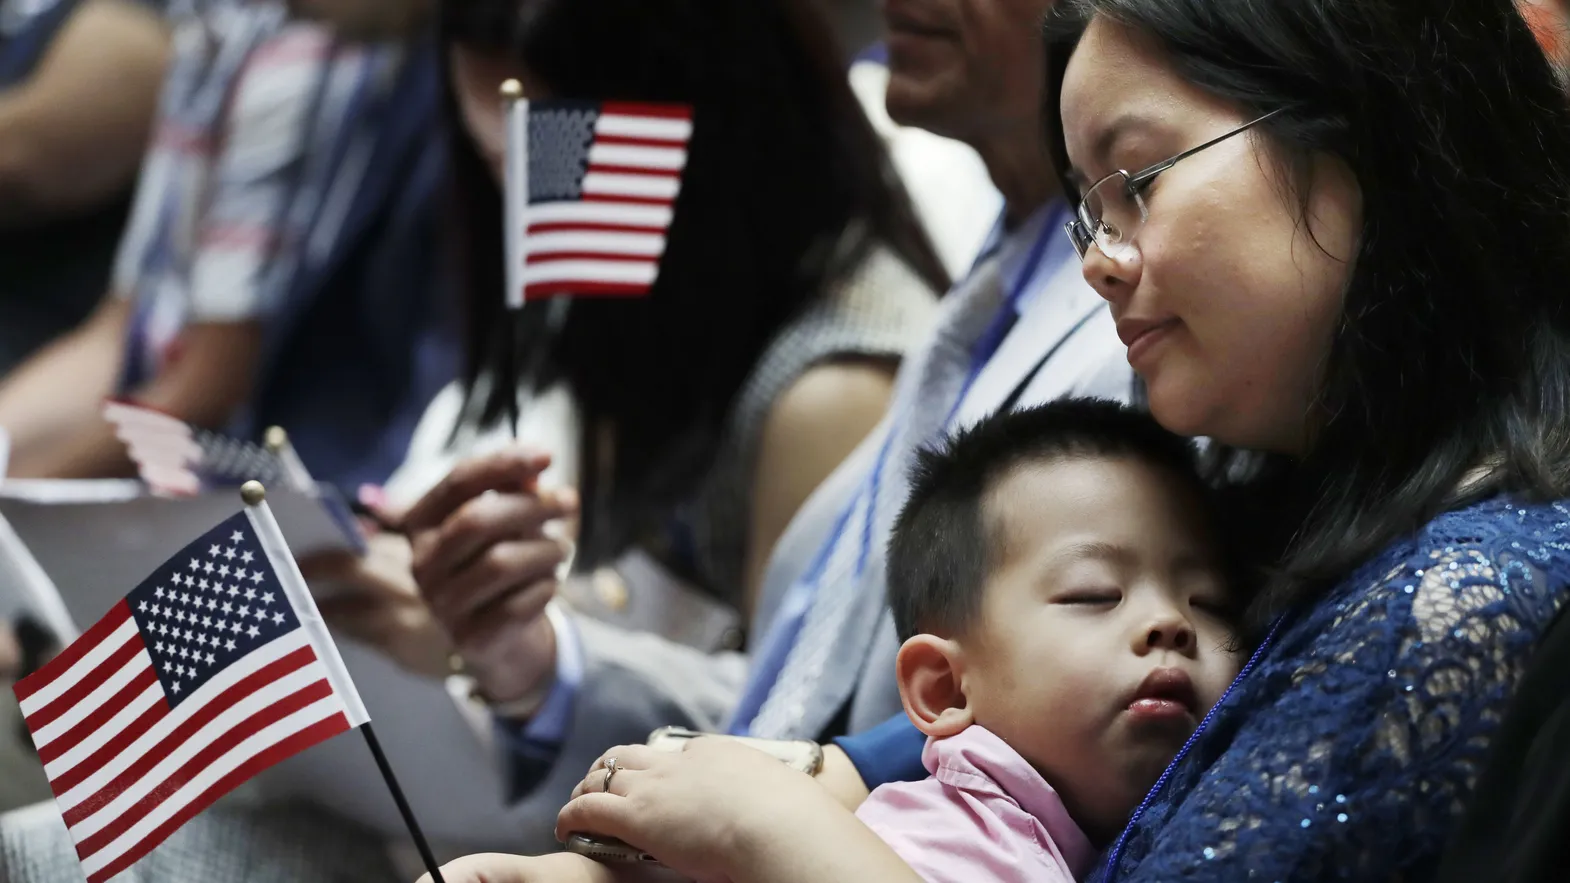 Study Finds Immigrant Families Are More Stable and Value Traditional Family Values More Than Native-Born Americans